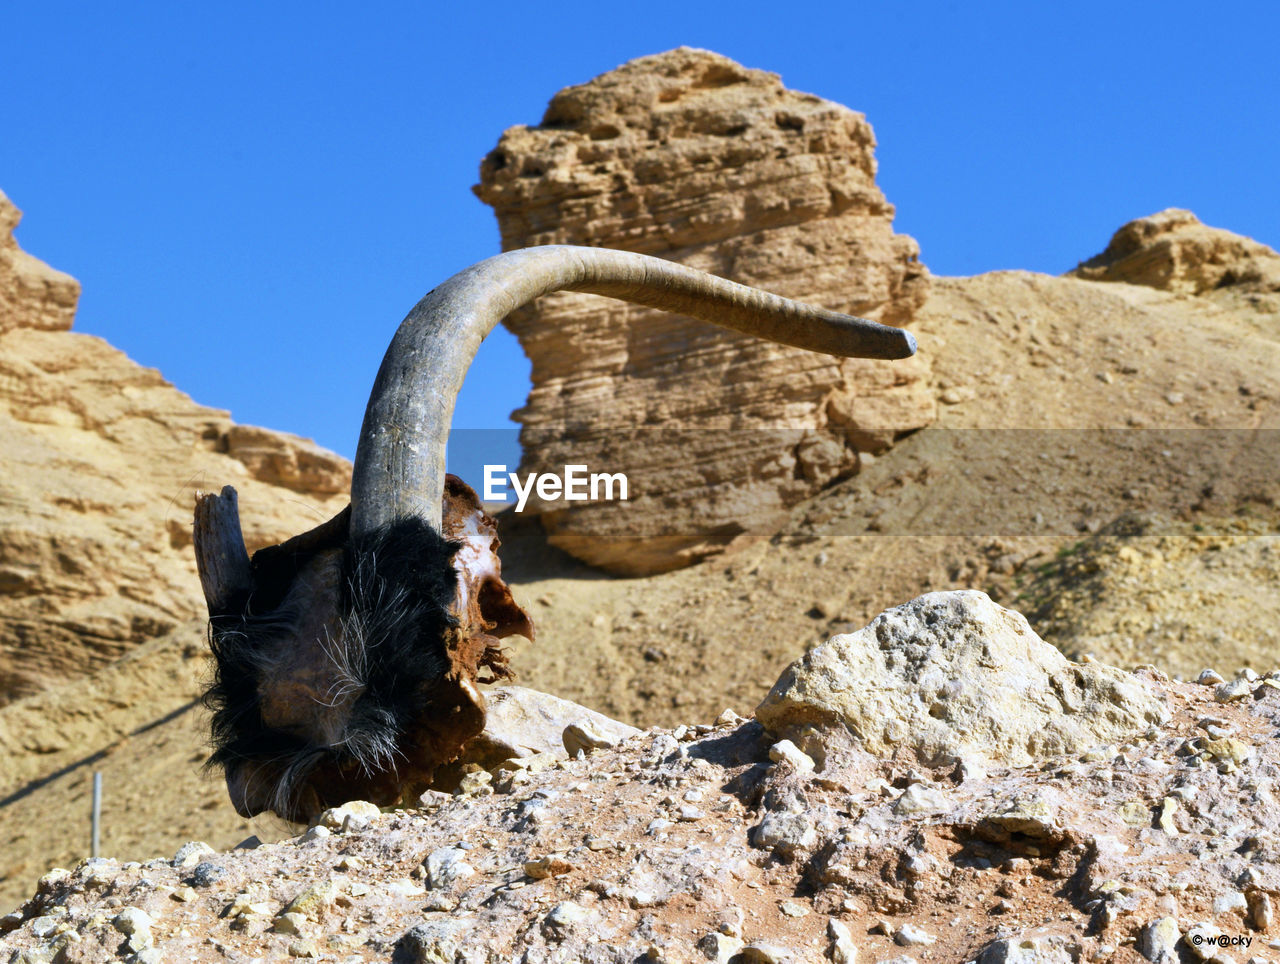 Close-up of animal skull on mountain against clear sky